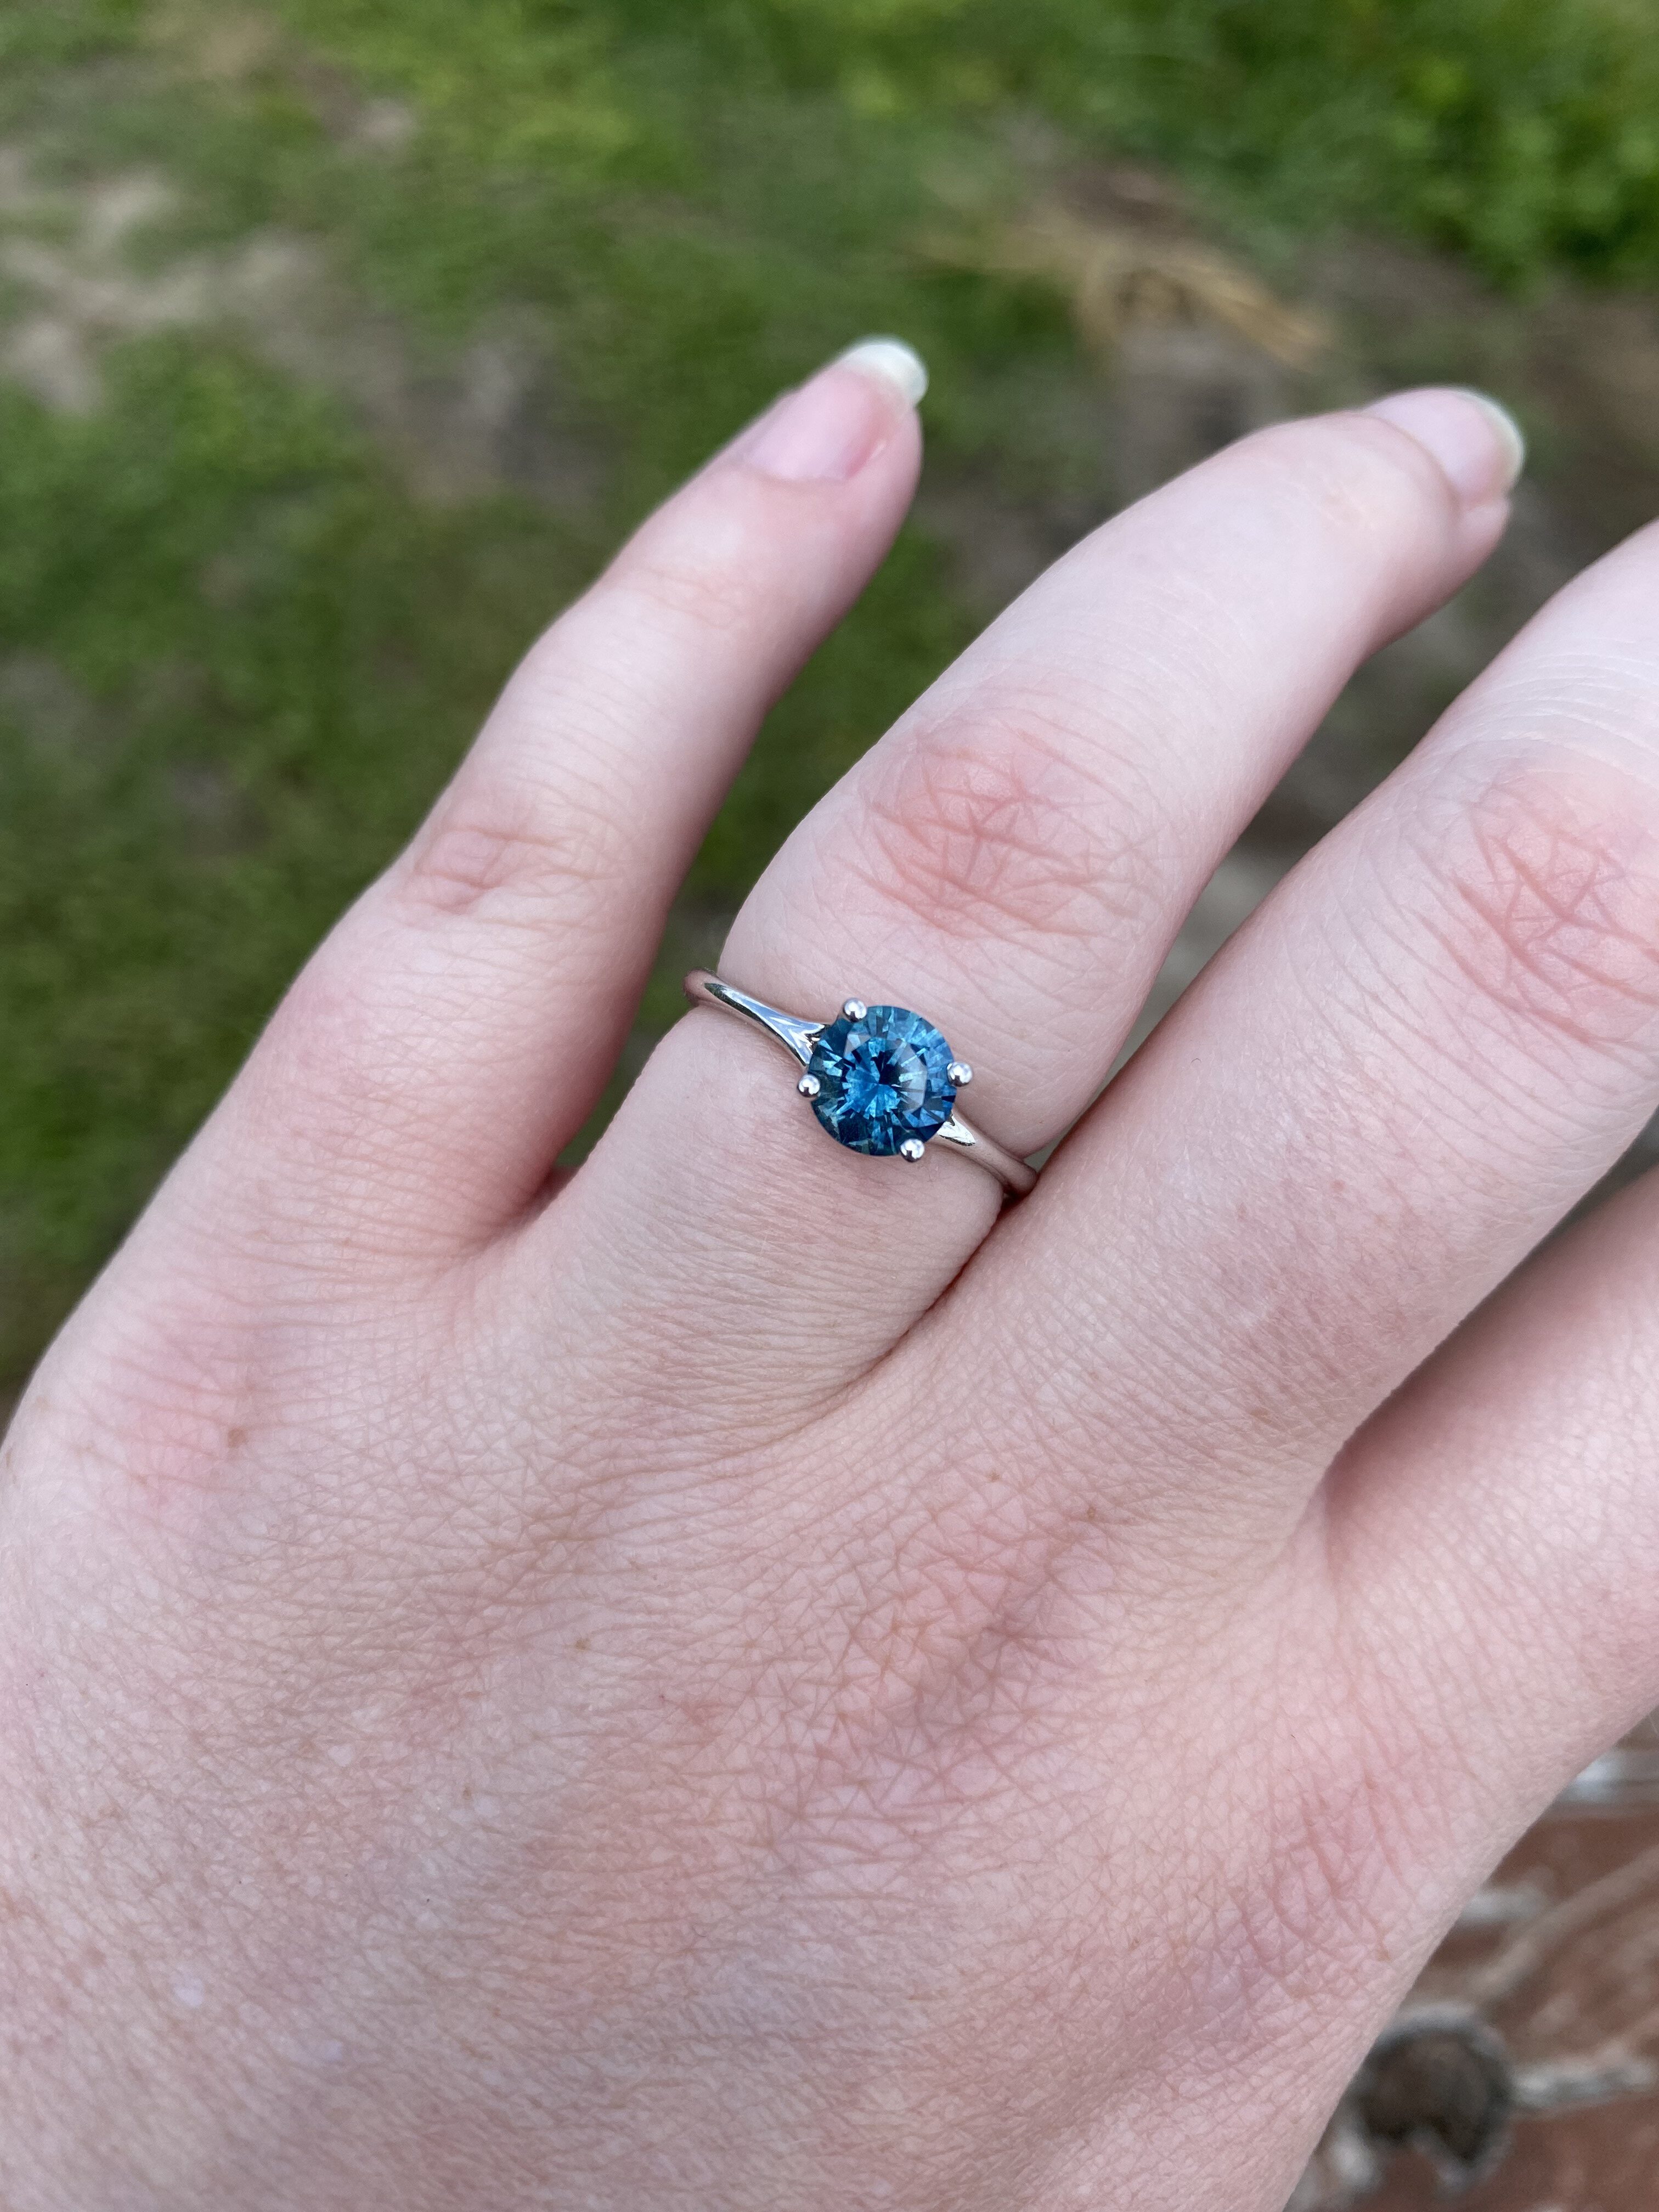 A photo from a customer review featuring a "Phoebe" ring in 14k white gold with 1.41-Carat Montana Sapphire